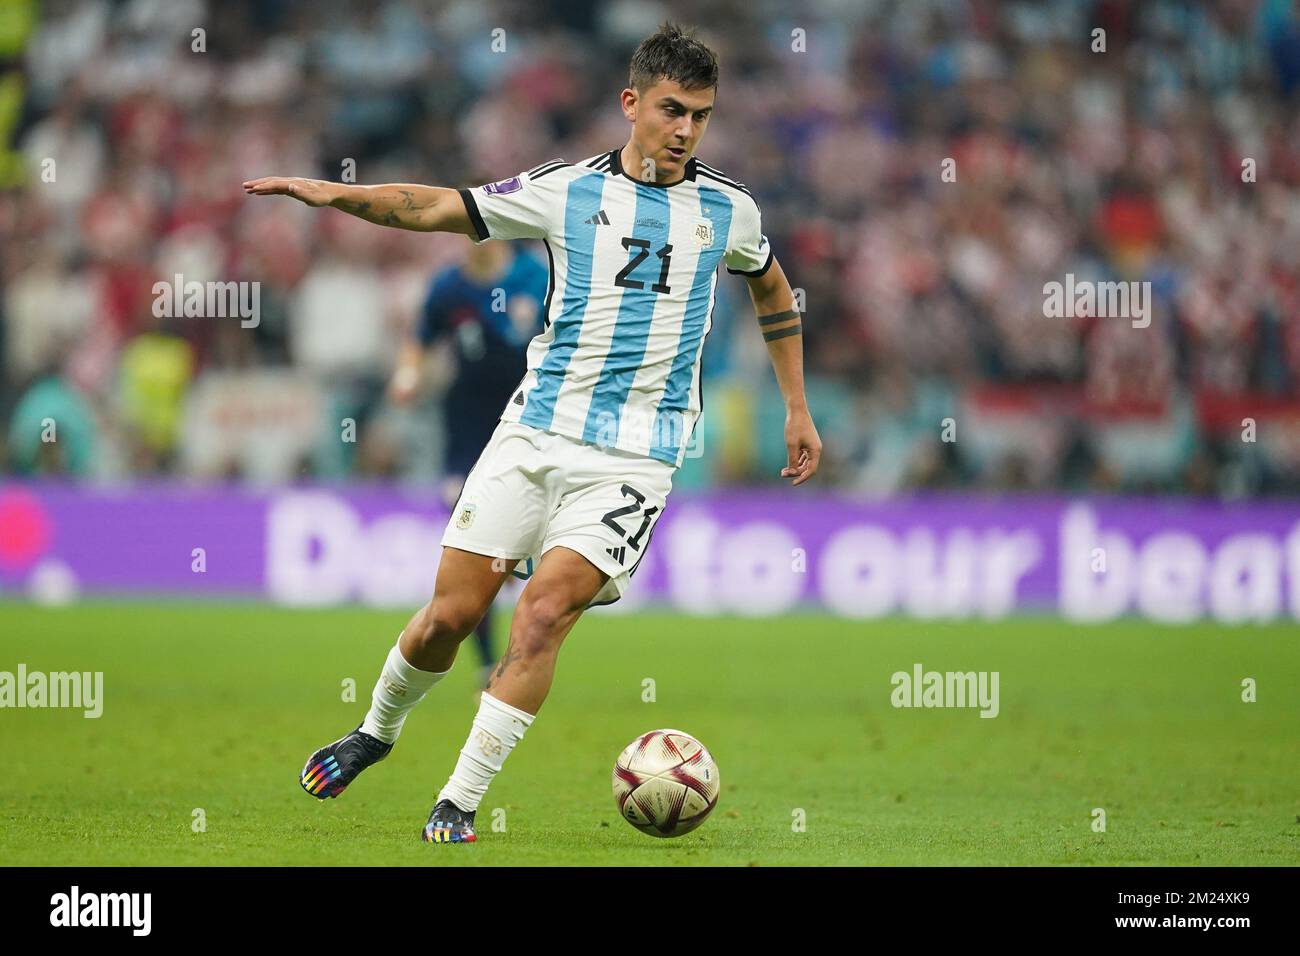 DOHA, QATAR - DECEMBER 13: Player of Argentina Paulo Dybala controls the ball during the FIFA World Cup Qatar 2022 Semi-finals match between Argentina and Croatia at Lusail Stadium on December 13, 2022 in Lusail, Qatar. (Photo by Florencia Tan Jun/PxImages) Stock Photo